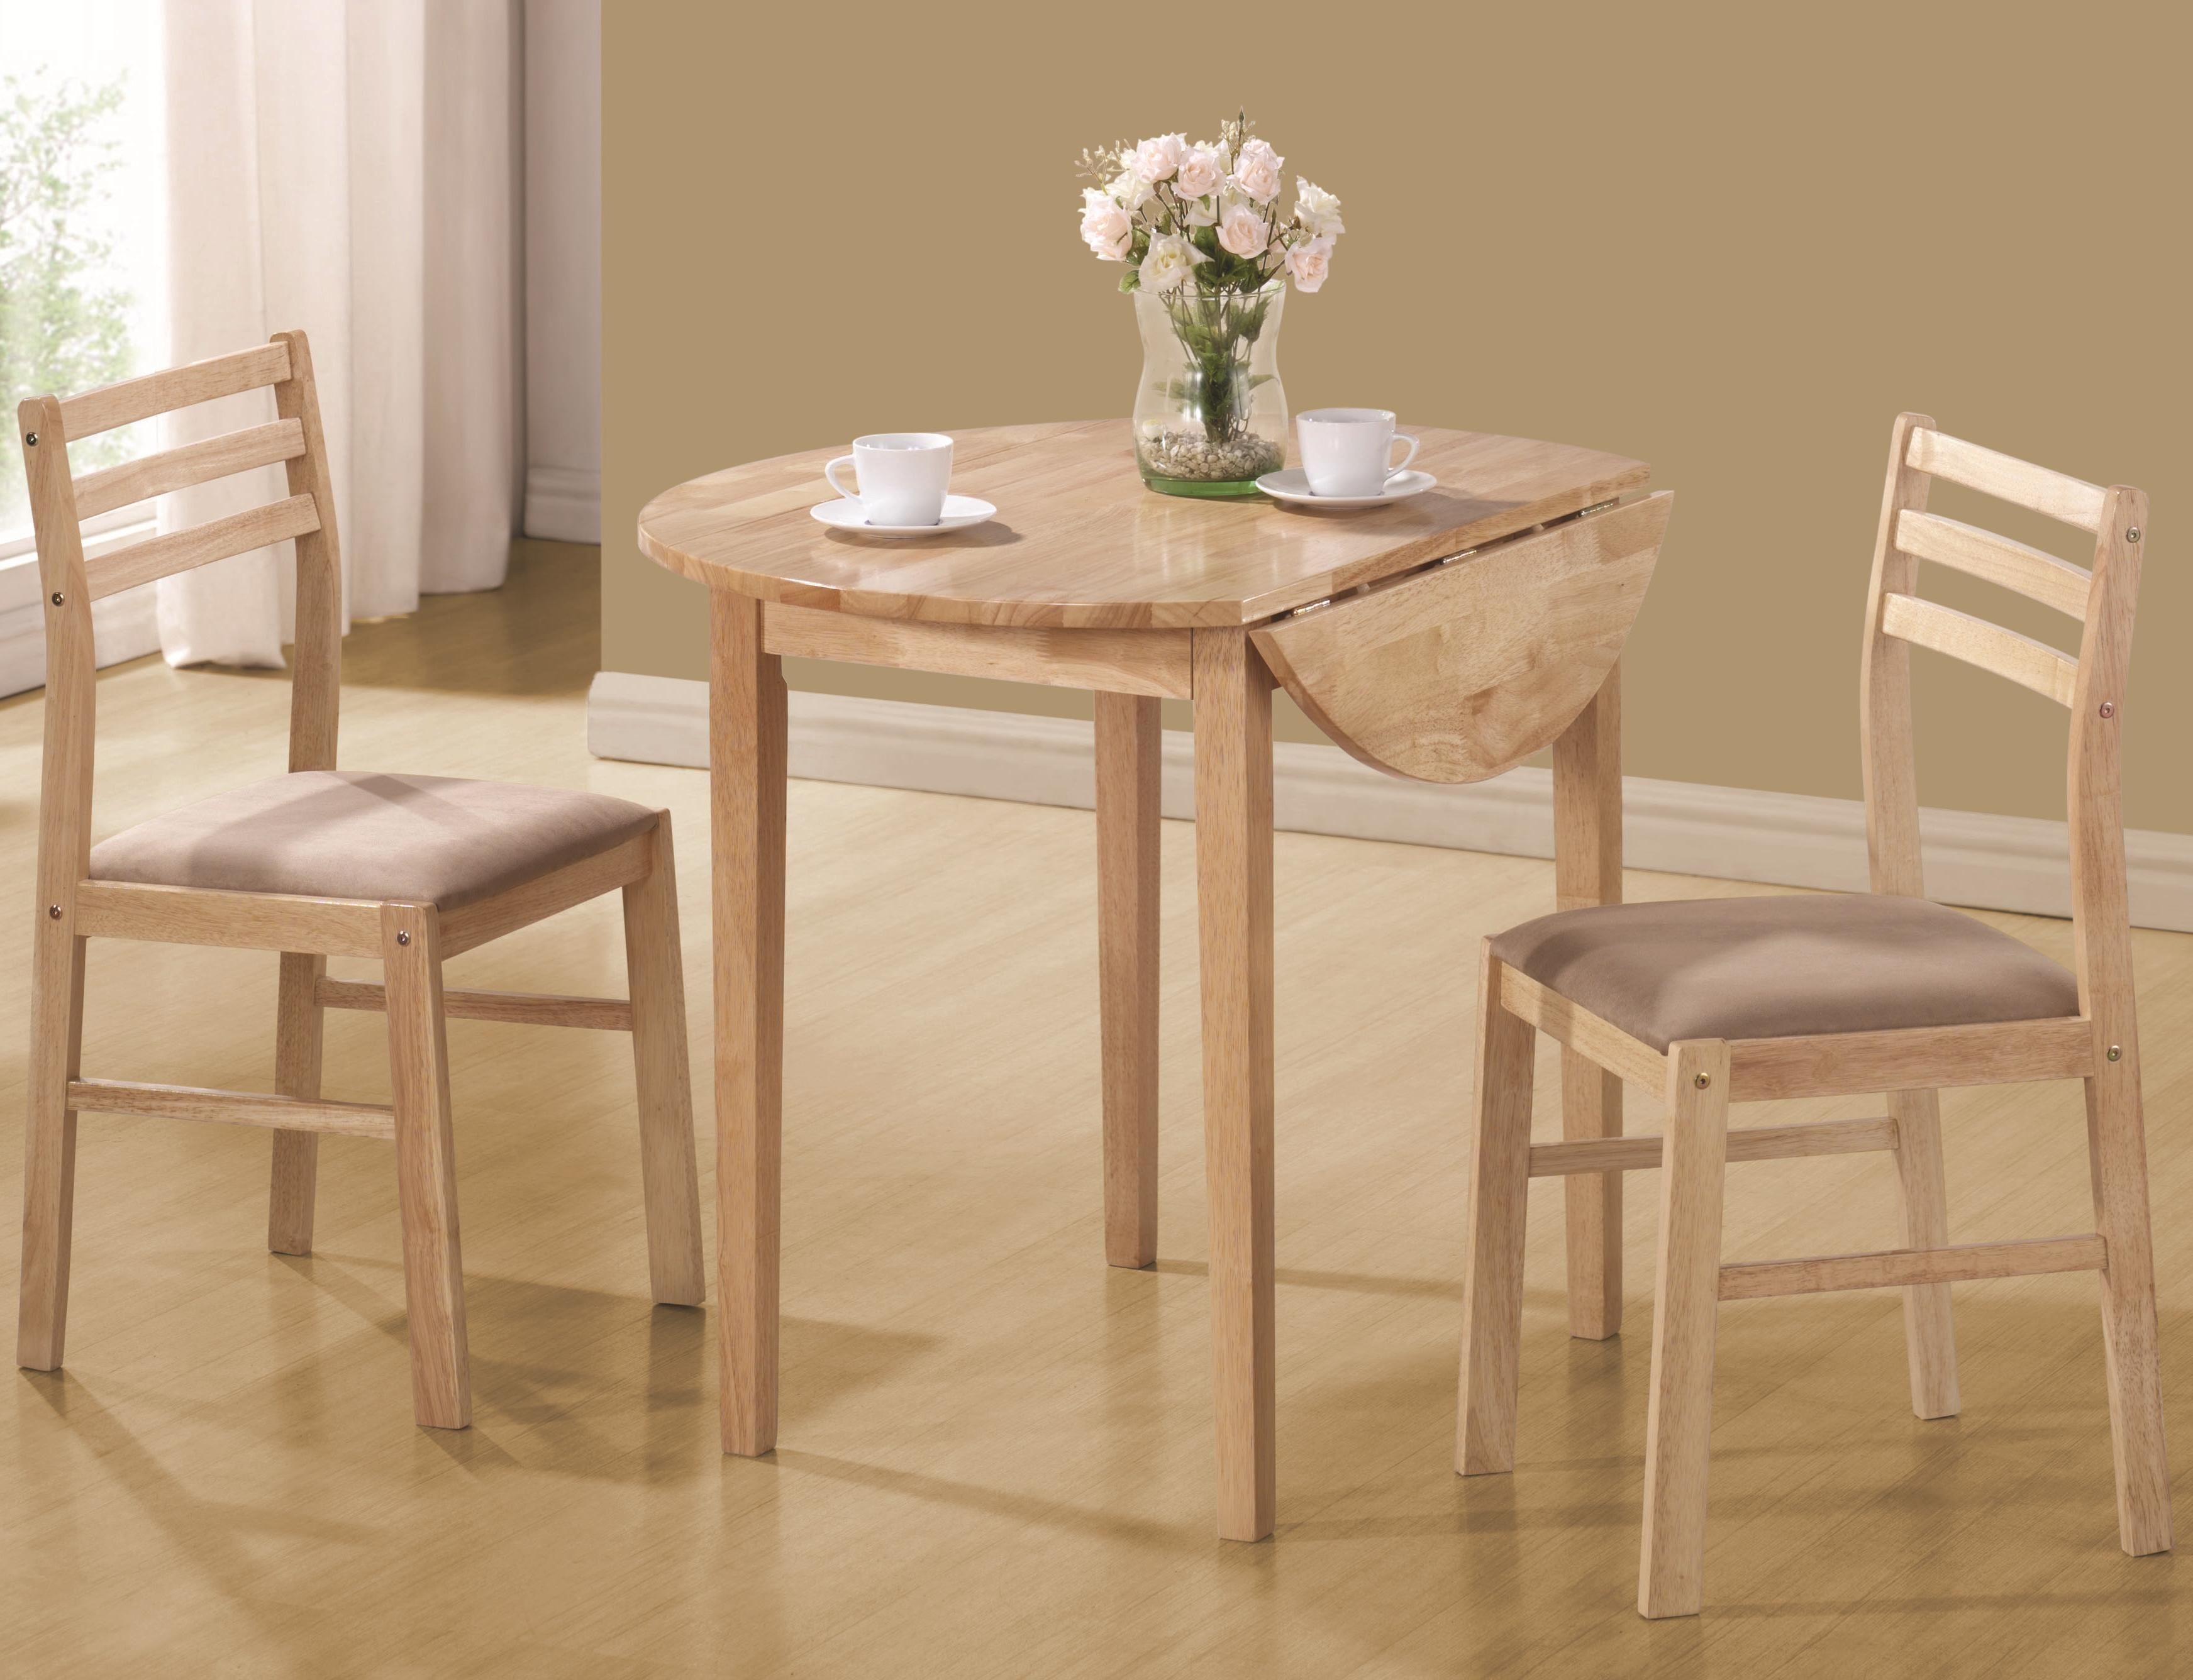 Dinettes Casual 3 Piece Table & Chair Setcoaster At Value City Furniture With Most Current Winsome 3 Piece Counter Height Dining Sets (View 17 of 20)